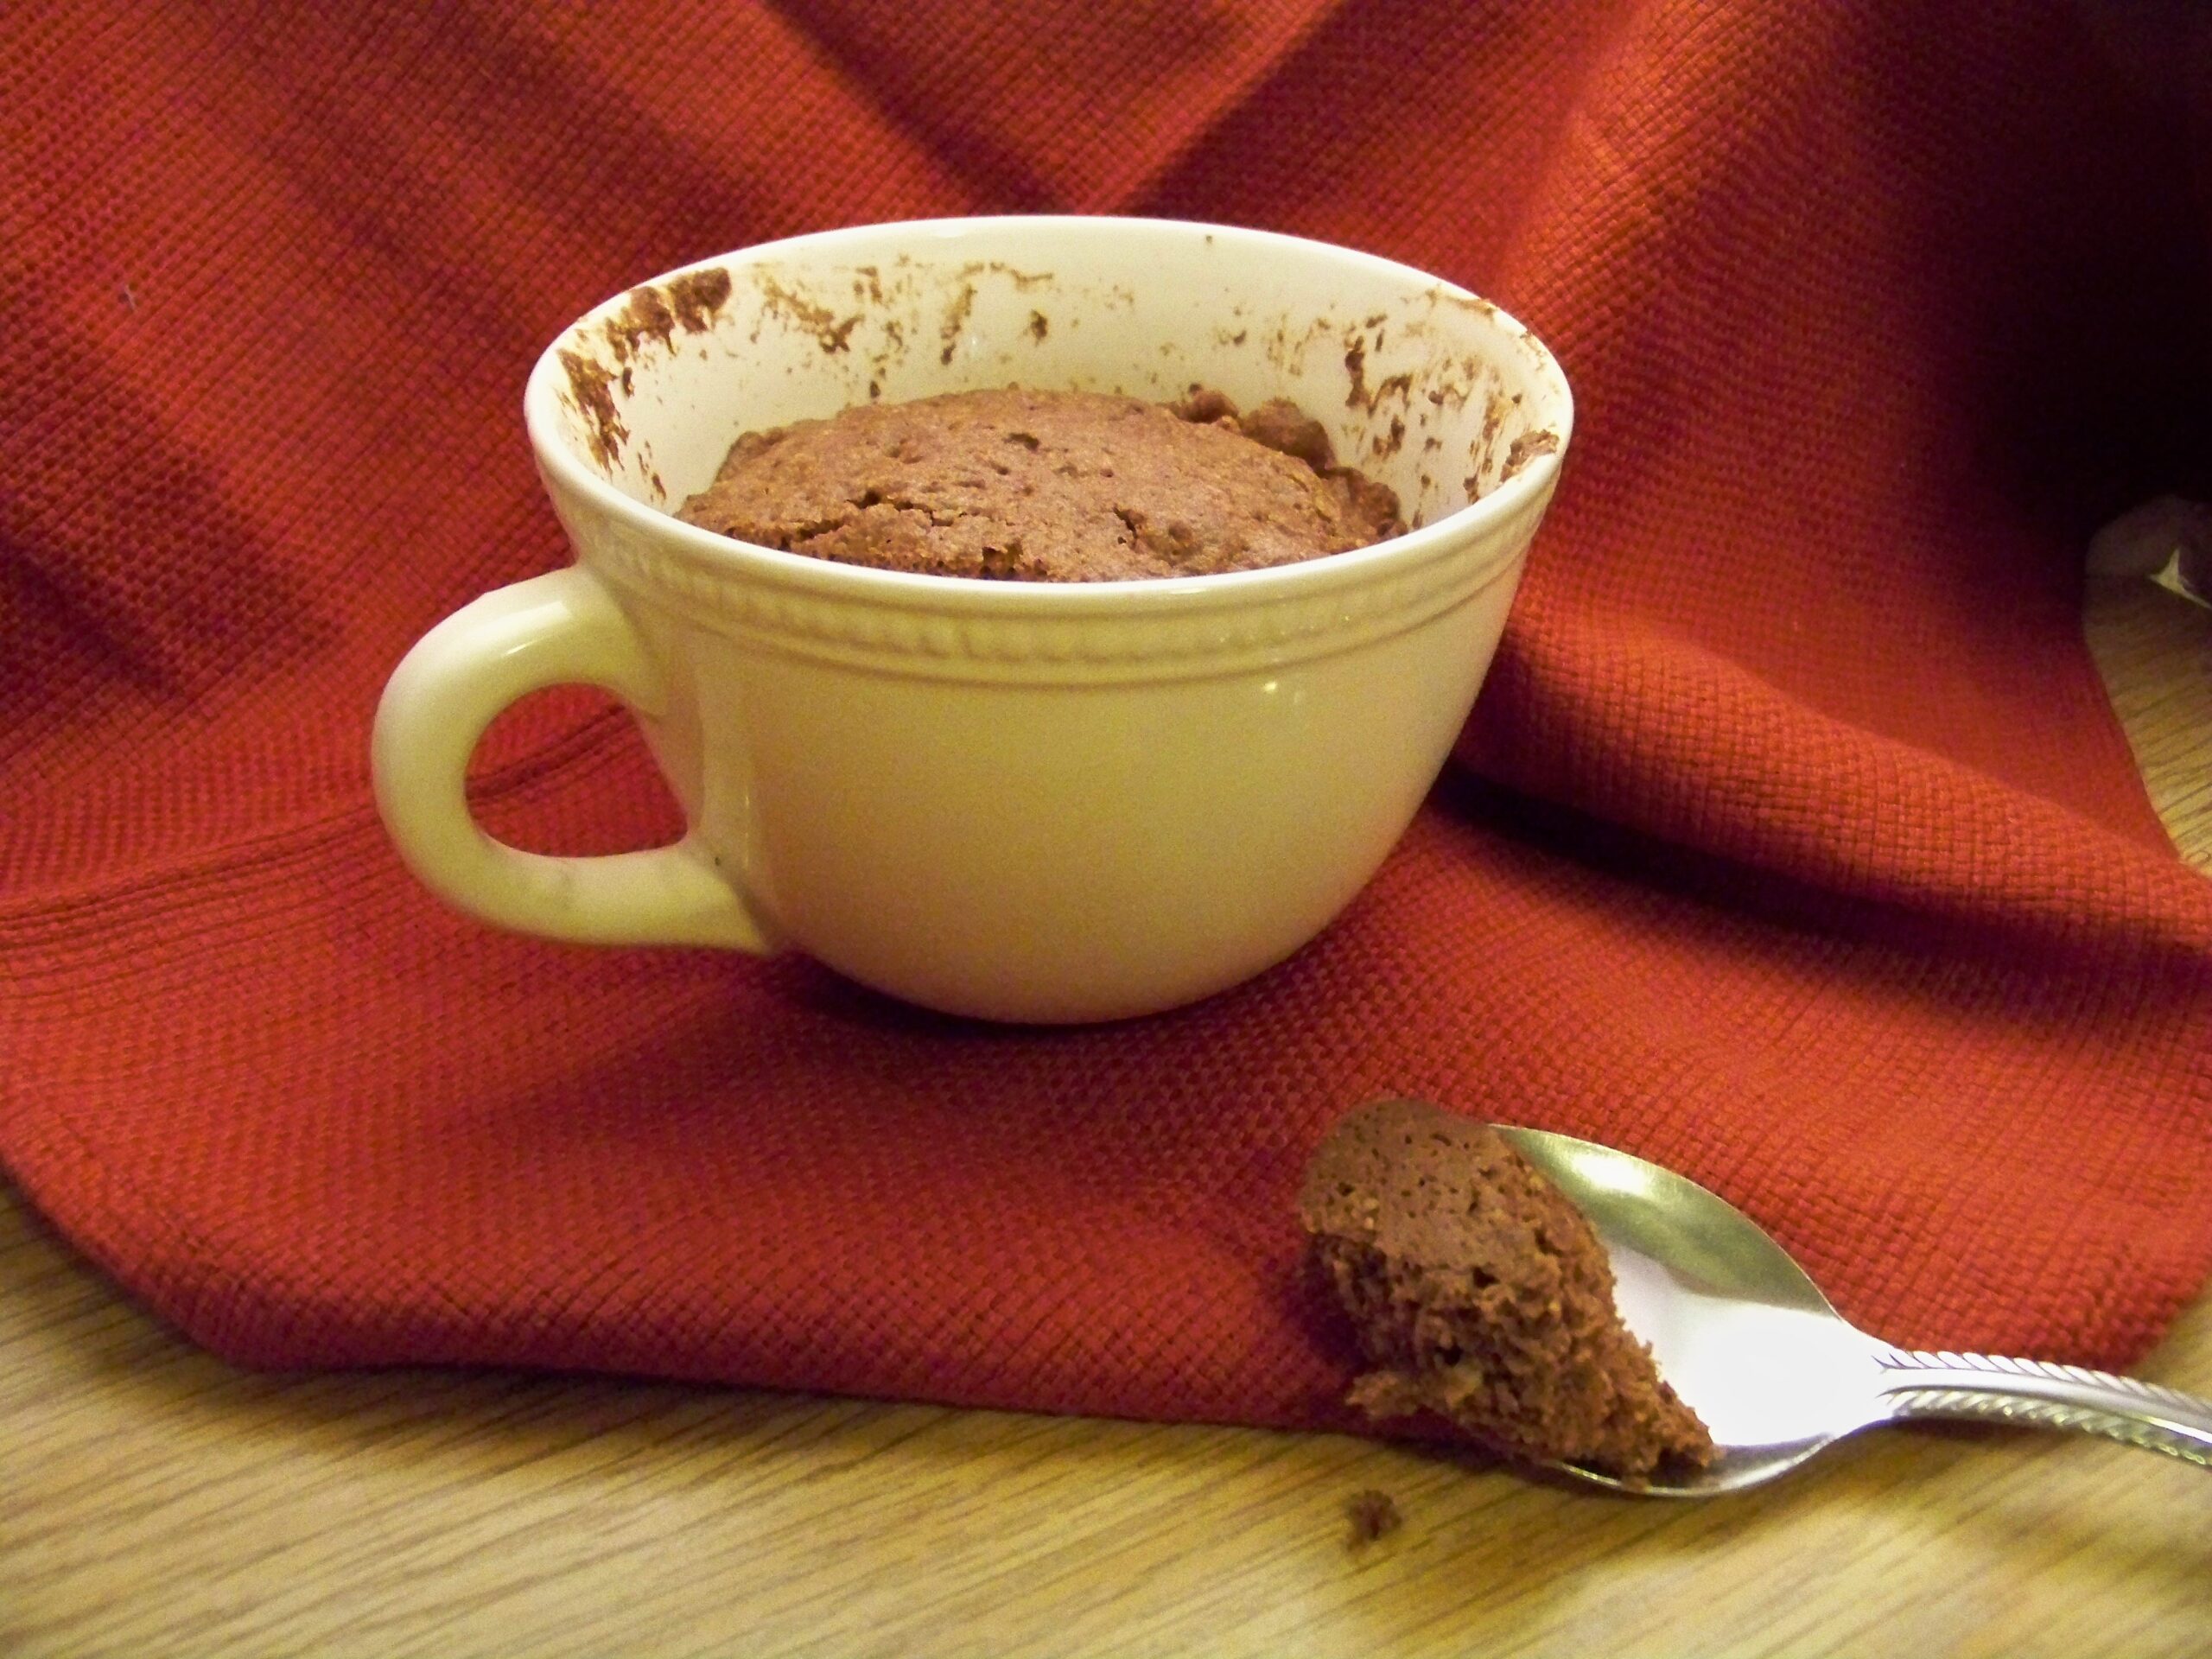 An image of a red cloth with a short white tea-cup style mug resting on it, containing a mocha muffin and a metal spoon slightly tot the right of the front of the mug with a ready bite of mocha muffin on it